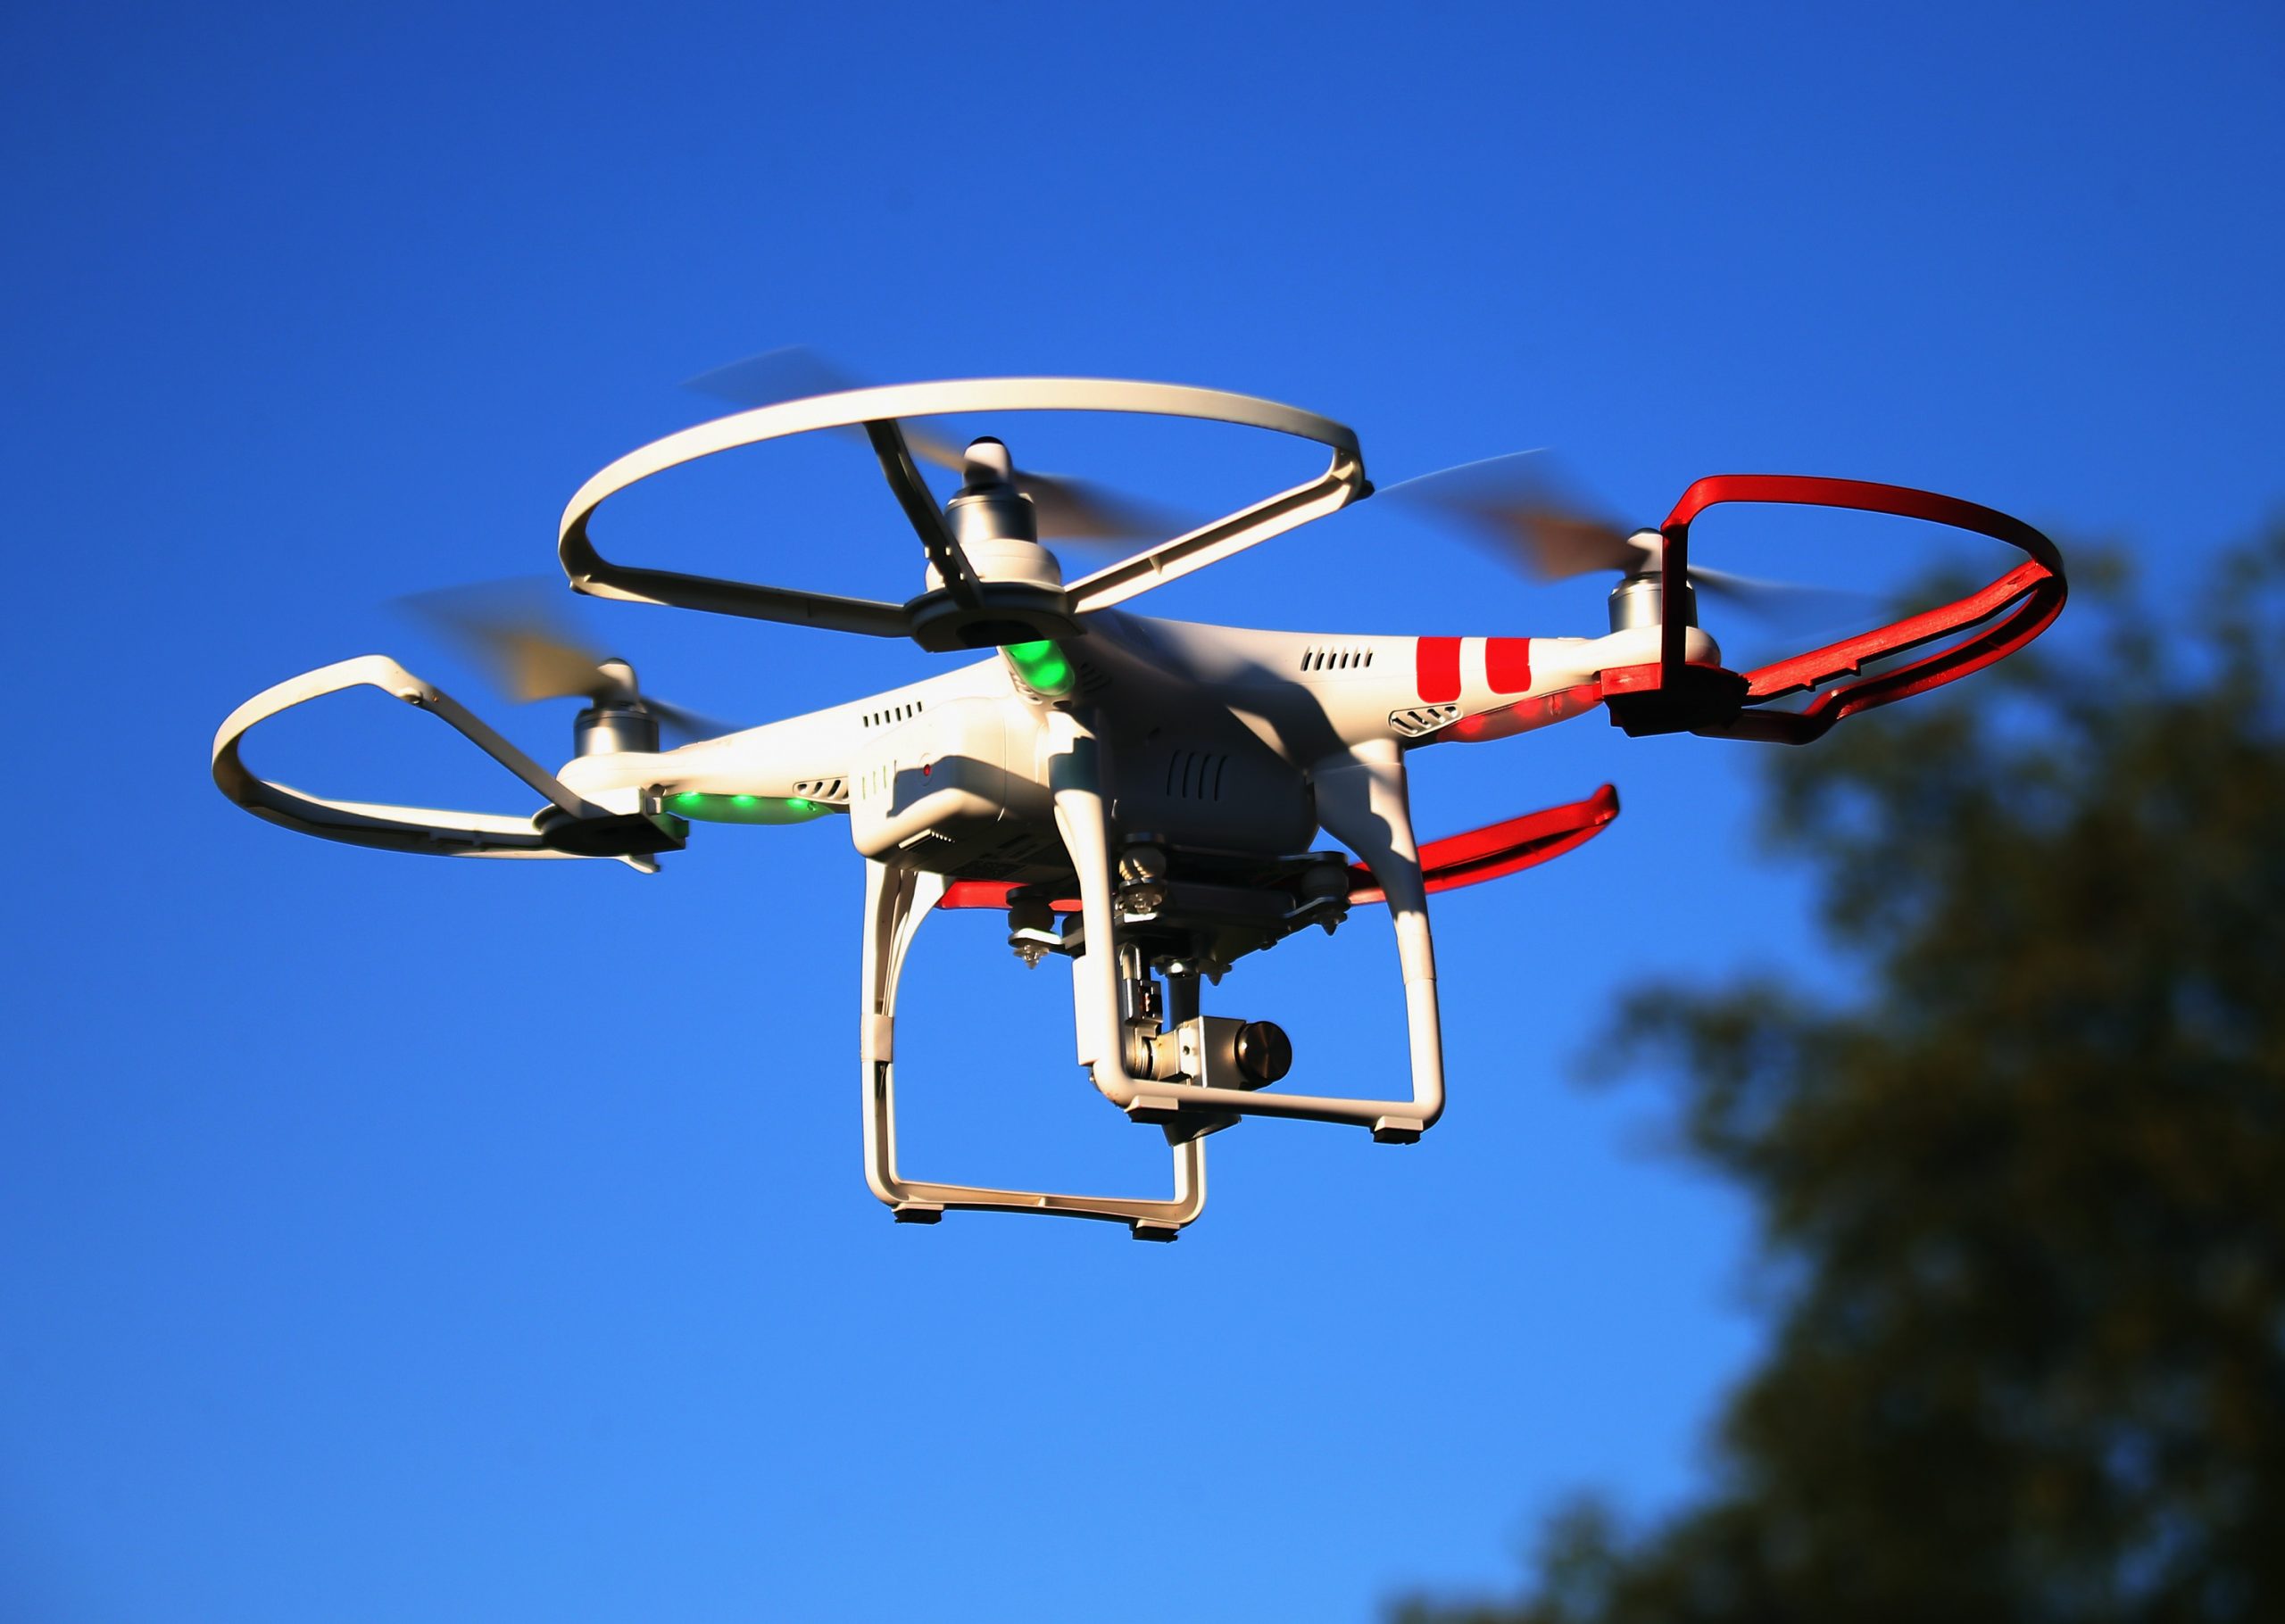 TTPS calls on citizens to stop flying drones near airports, prisons and sensitive facilities